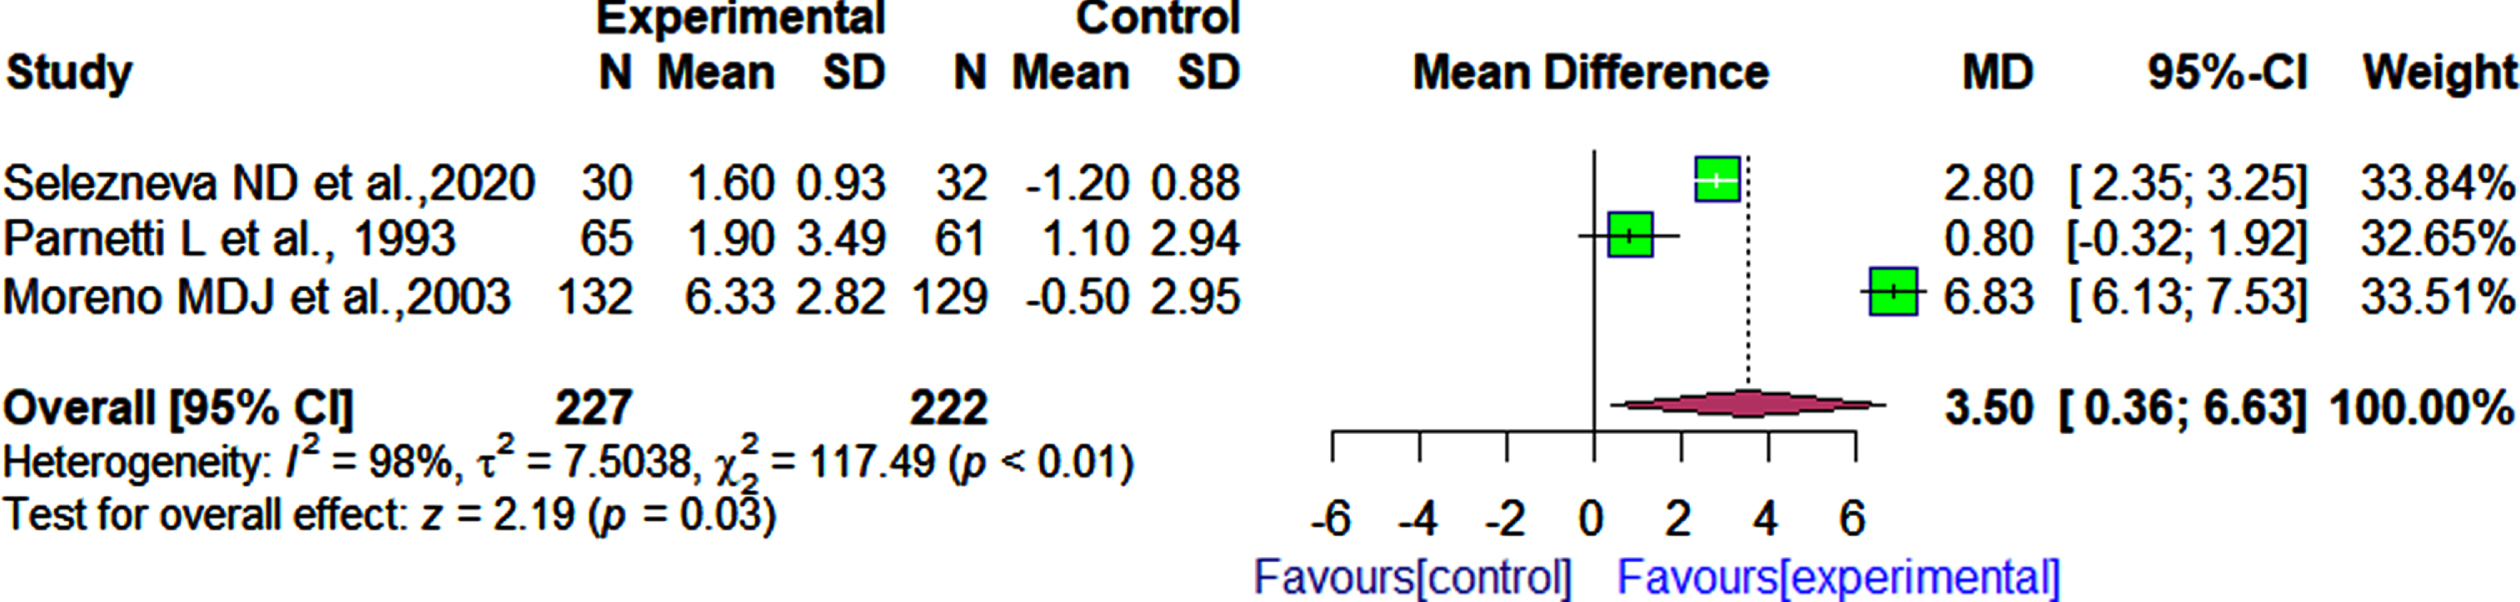 Comparison of effects of choline alphoscerate (1 r200 mg per day) and placebo or acetyl-L-carnitine (1 r500 mg per day) on patient cognition as measured by the MMSE after follow-up periods ranging from 90 days to 180 days.